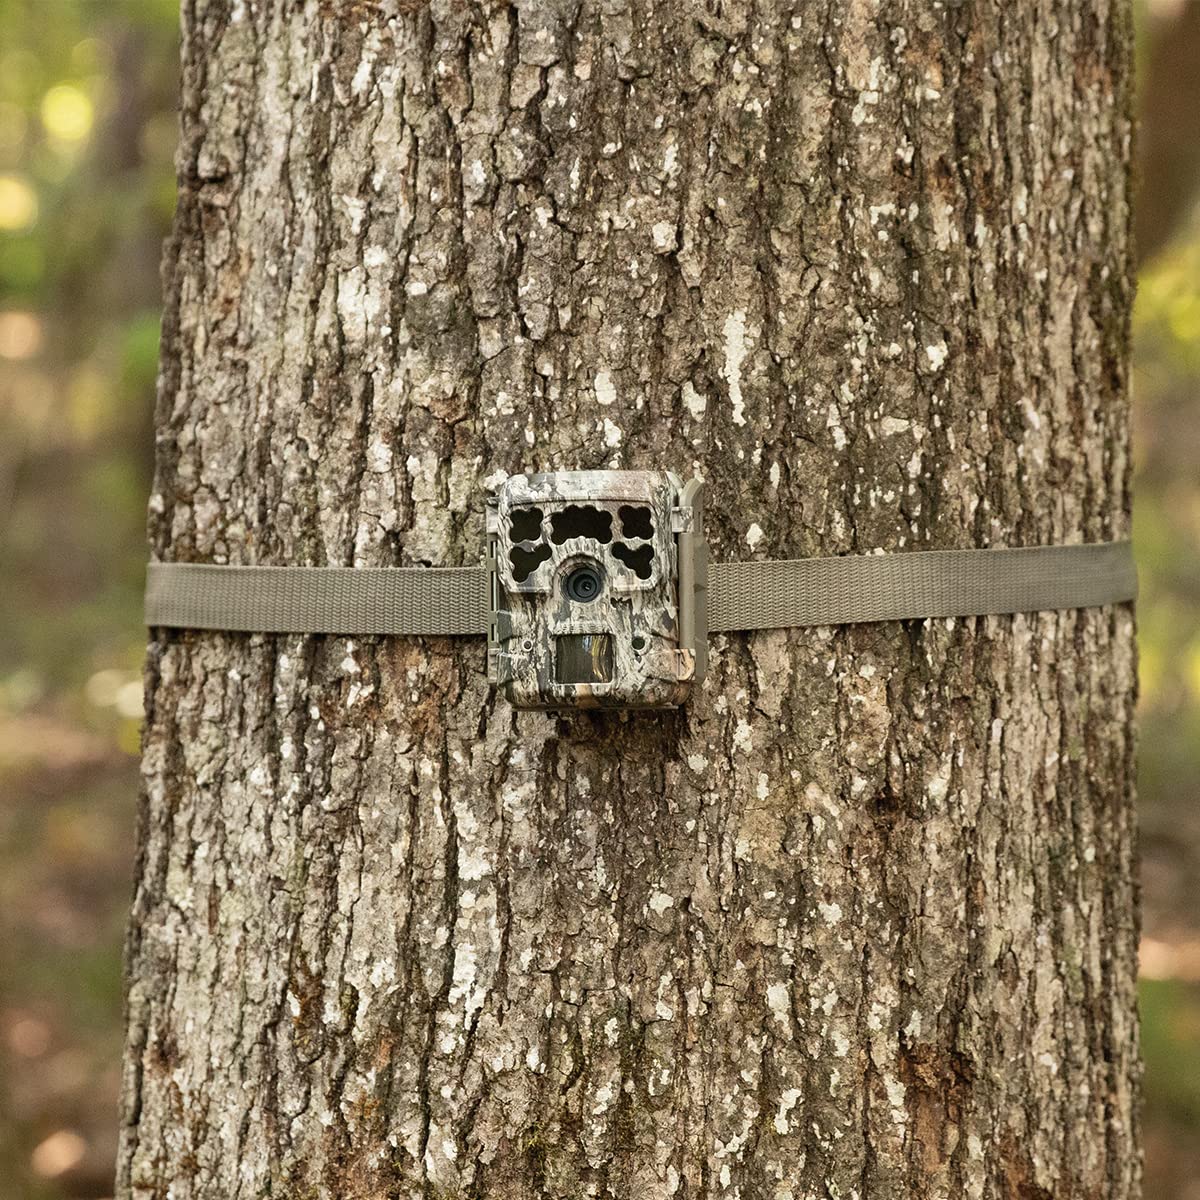 Moultrie Micro-42 Trail Camera Kit,720p